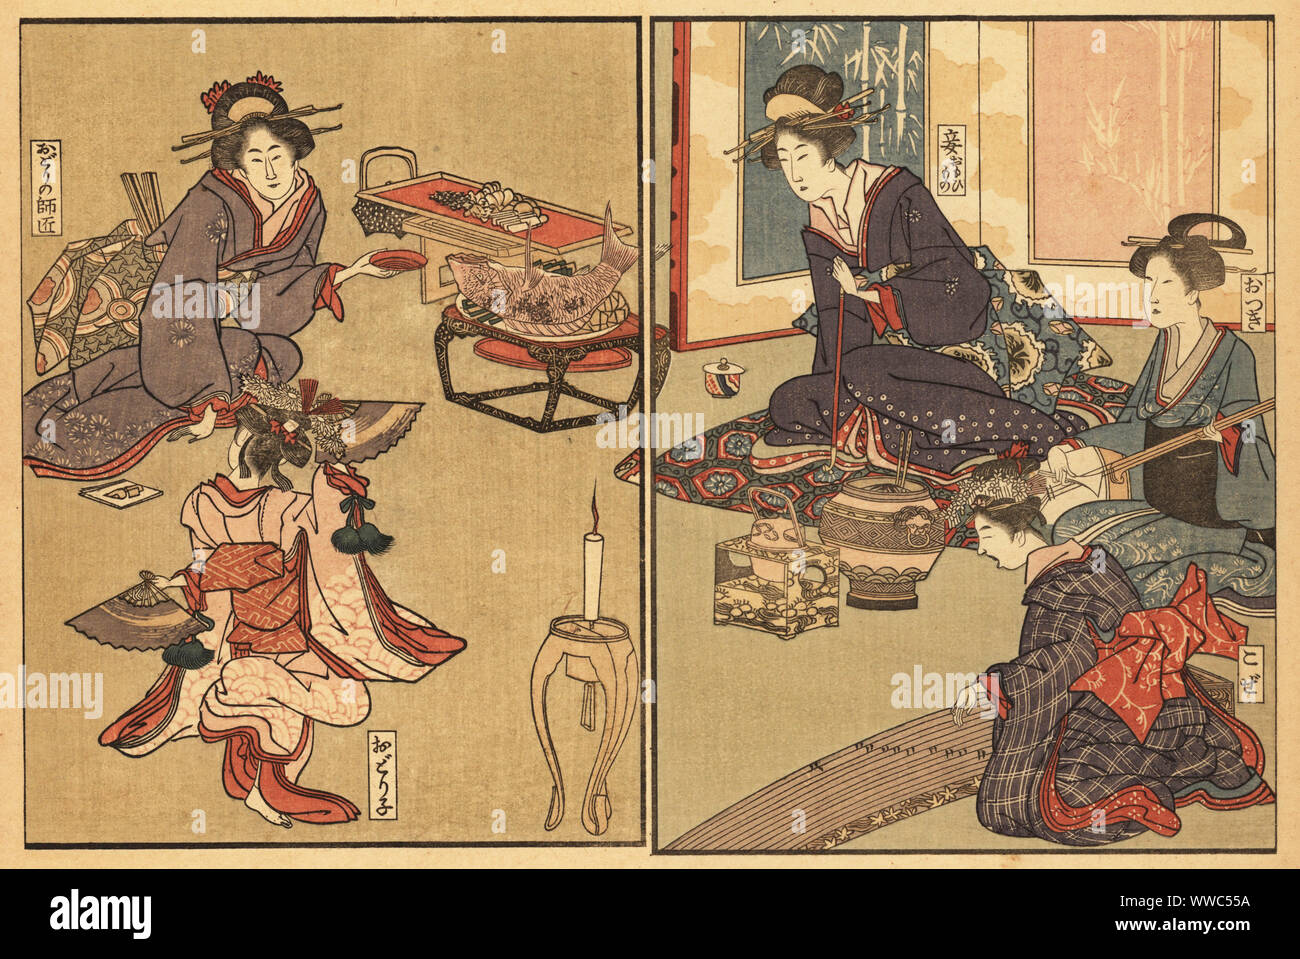 Concubine (mekake) of a high-ranking man with tobacco pipe watching a dancing girl accompanied by musicians on shamisen and blind koto harpist (koze). The dance instructor drinks sake near a large grilled sea bream on a plate. 18th century. Handcoloured ukiyo-e woodblock print by Toyokuni Utagawa from Shikitei Sanba’s Ehon Imayo Sugata (Picture Book of the Modern Forms and Figures, Tokyo, 1916. Reprint of the original from 1802. Stock Photo